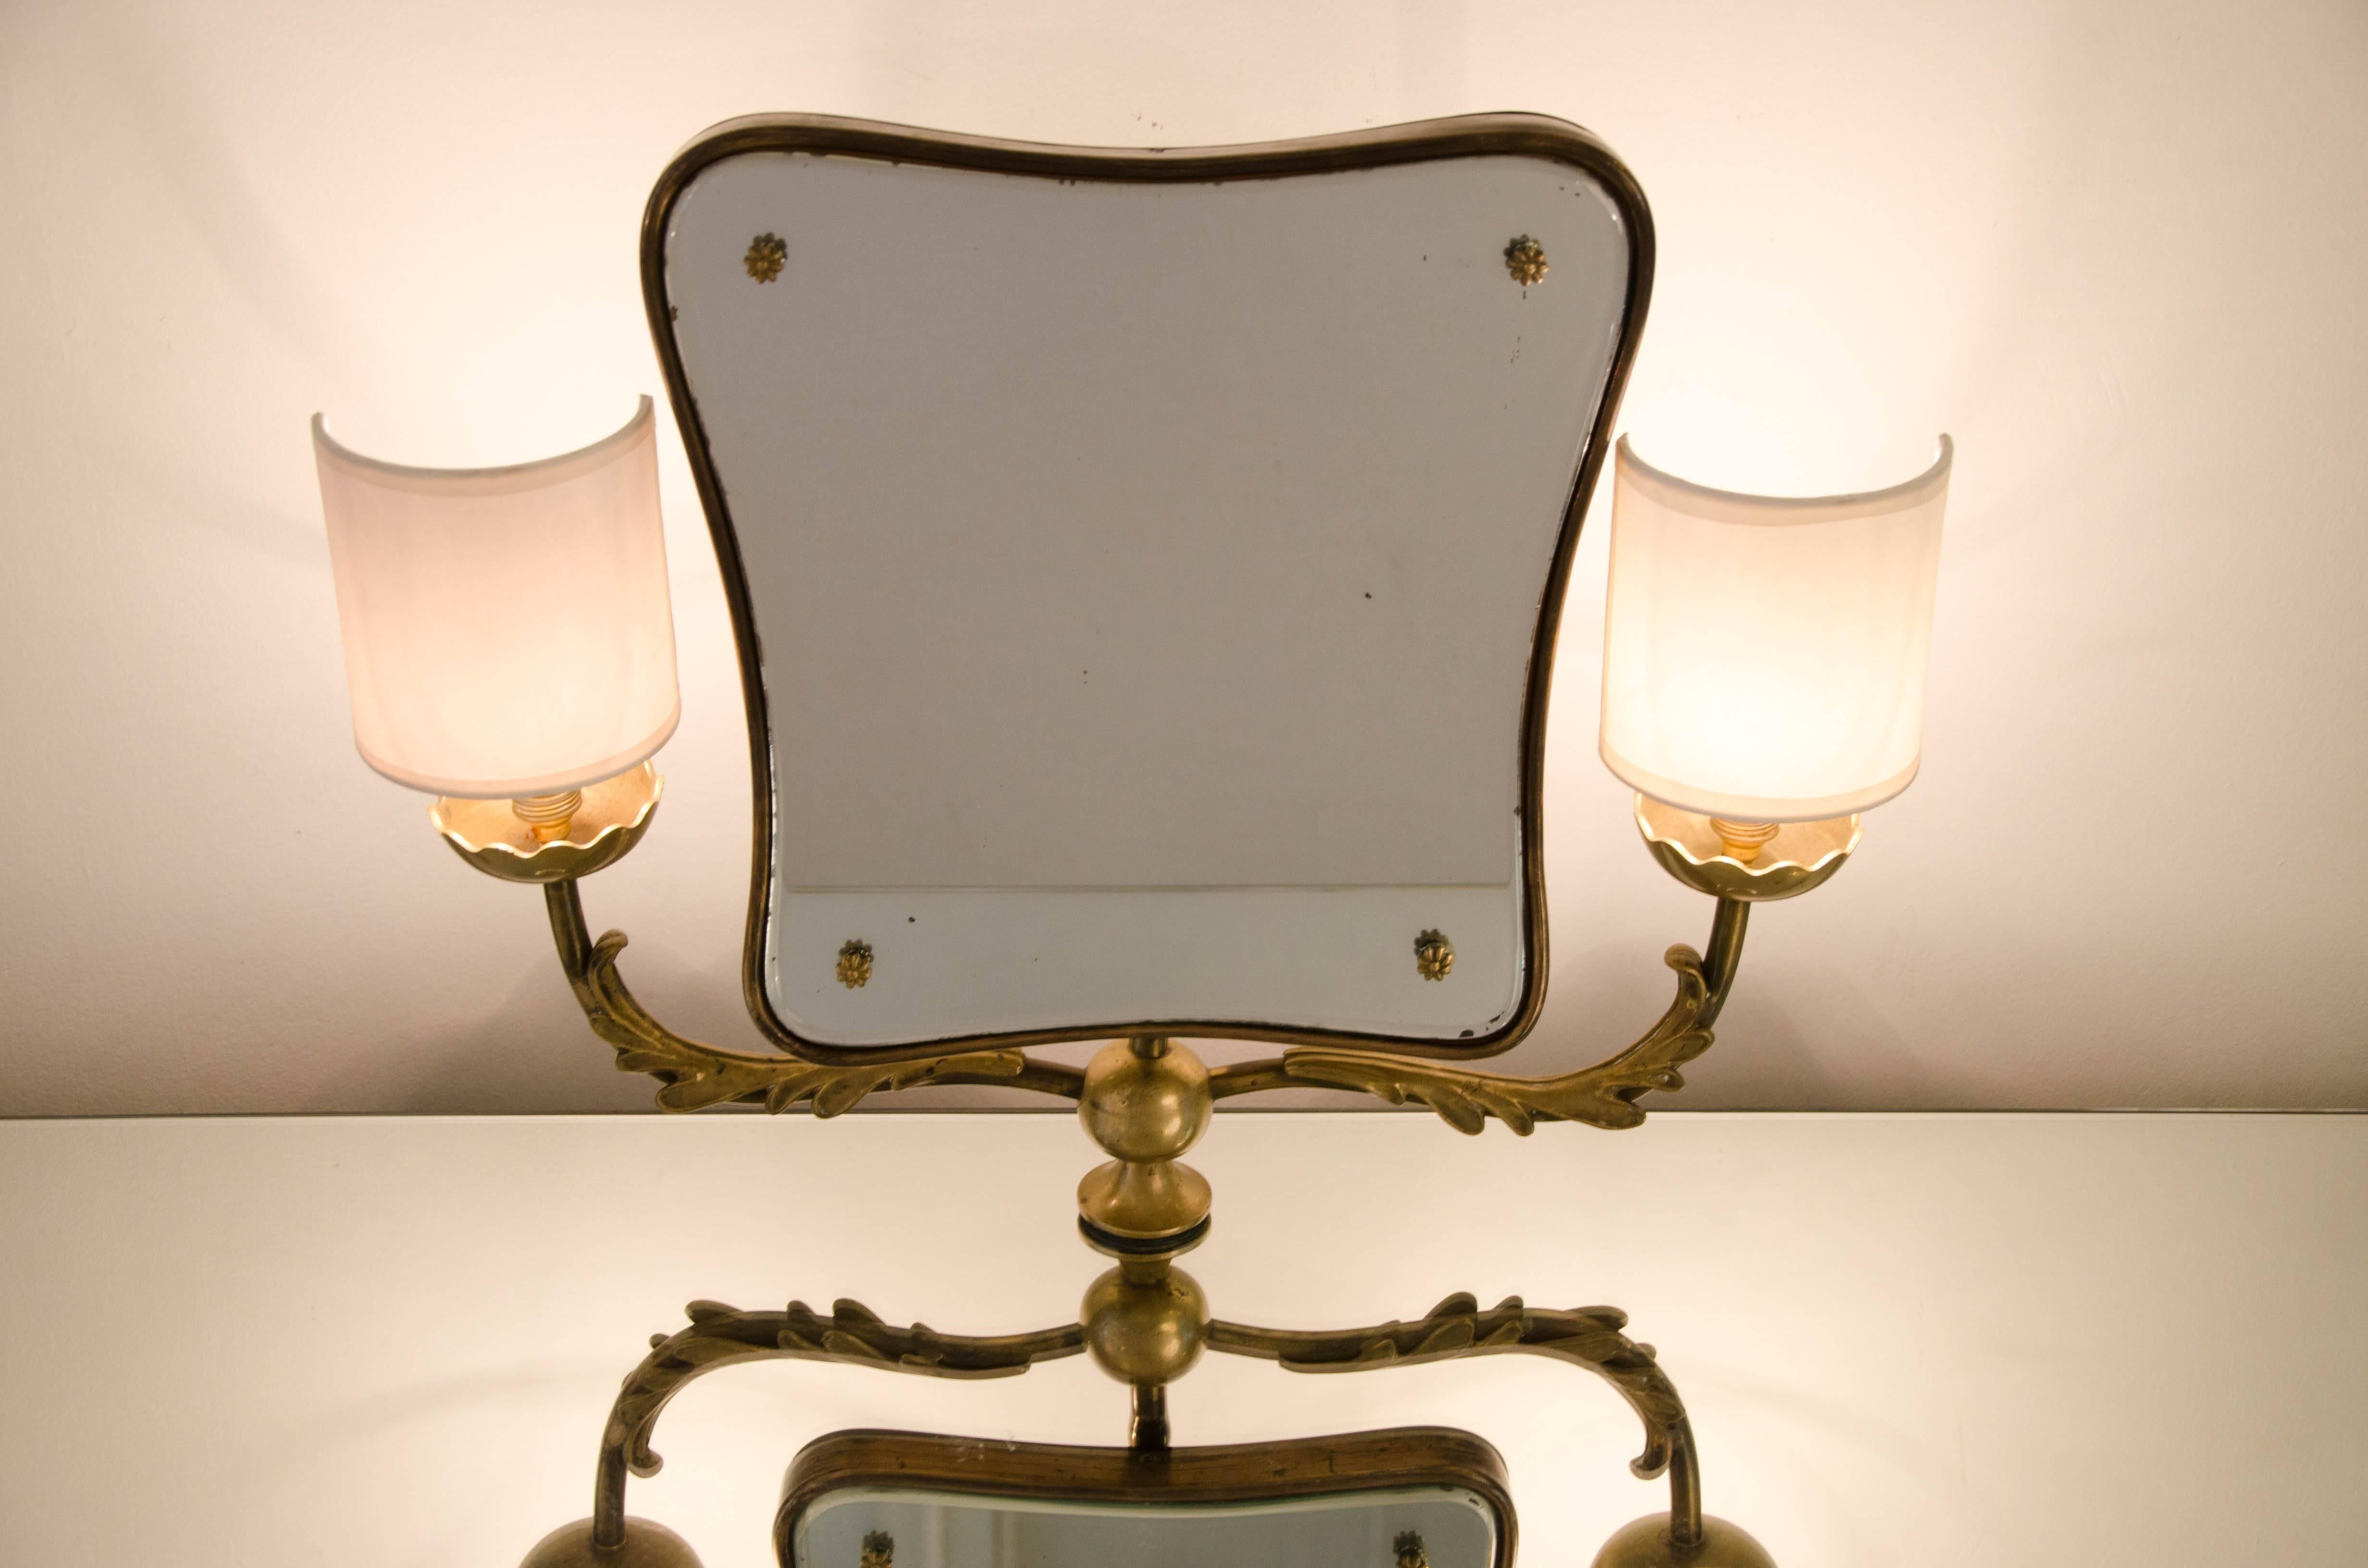 Elegant Italian ebonized dressing table with intricate brass detailing to the legs and feet. Curved tilting mirror with brass trim is supported by a decorative brass arm, which extends to support two side lights. Three curved mirrored drawers